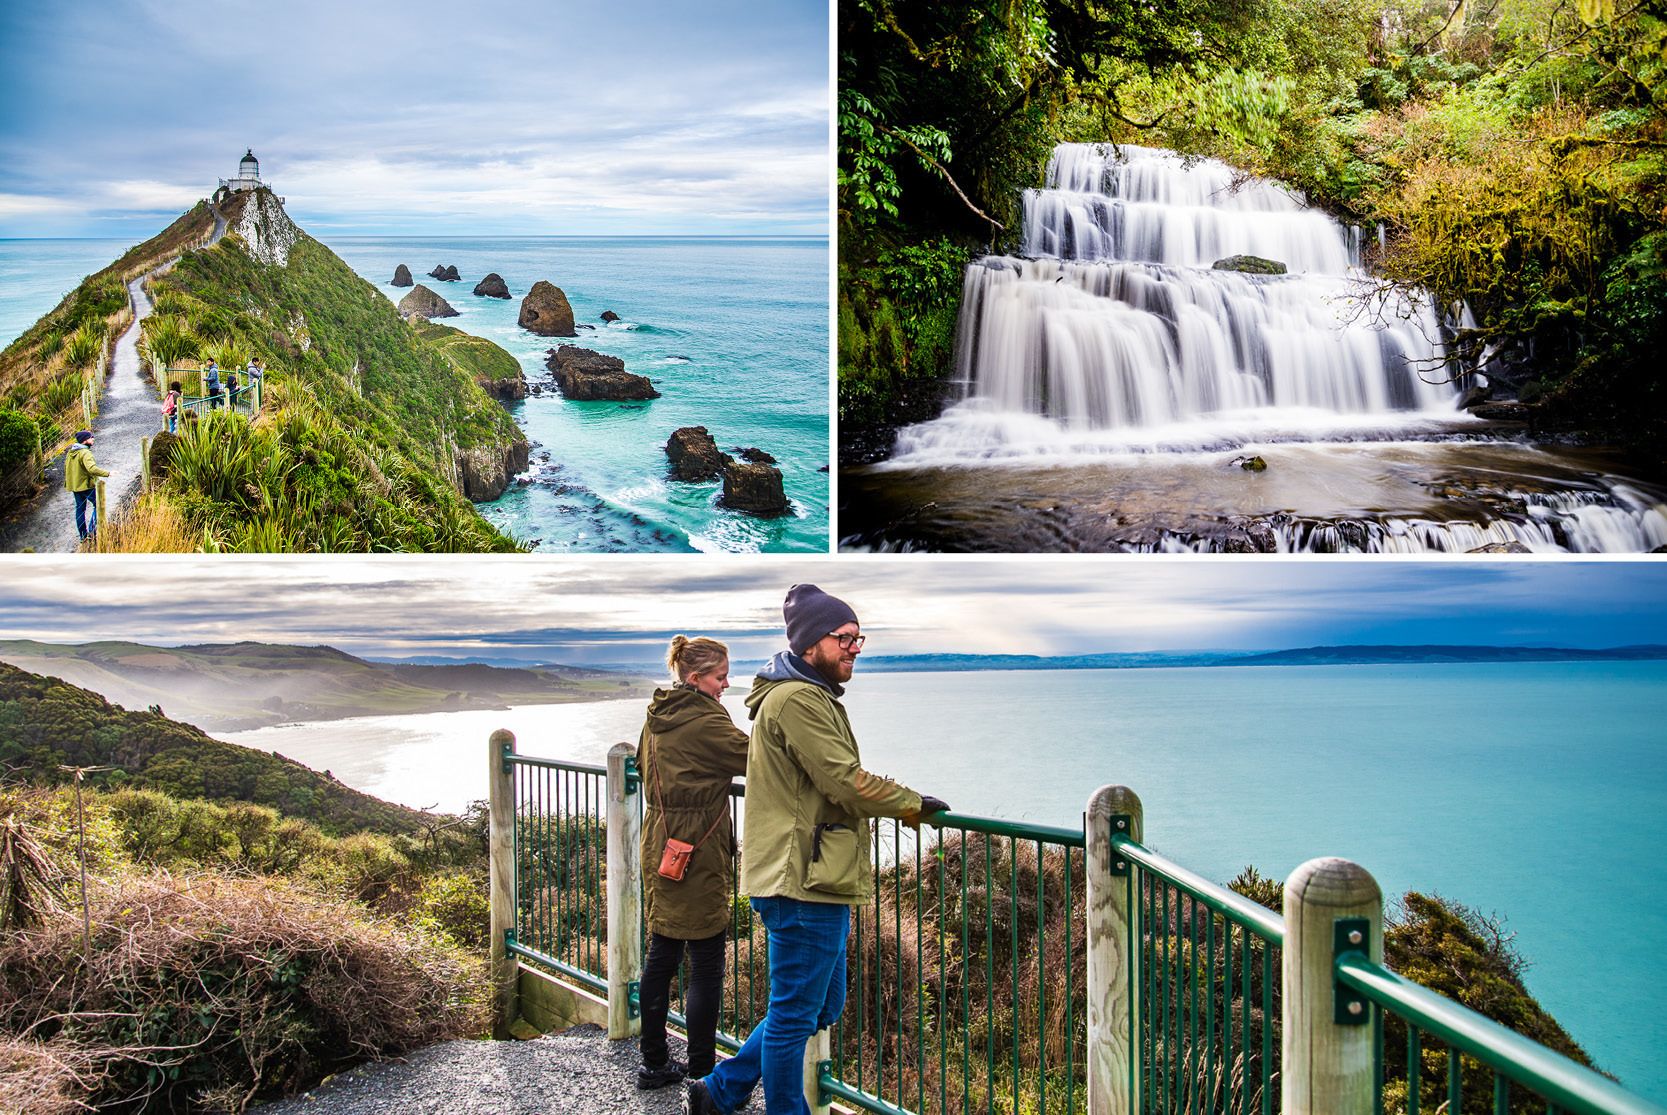 67 Attractions & Fun Things to Do in Dunedin from NZ13 Expedia.co.nz